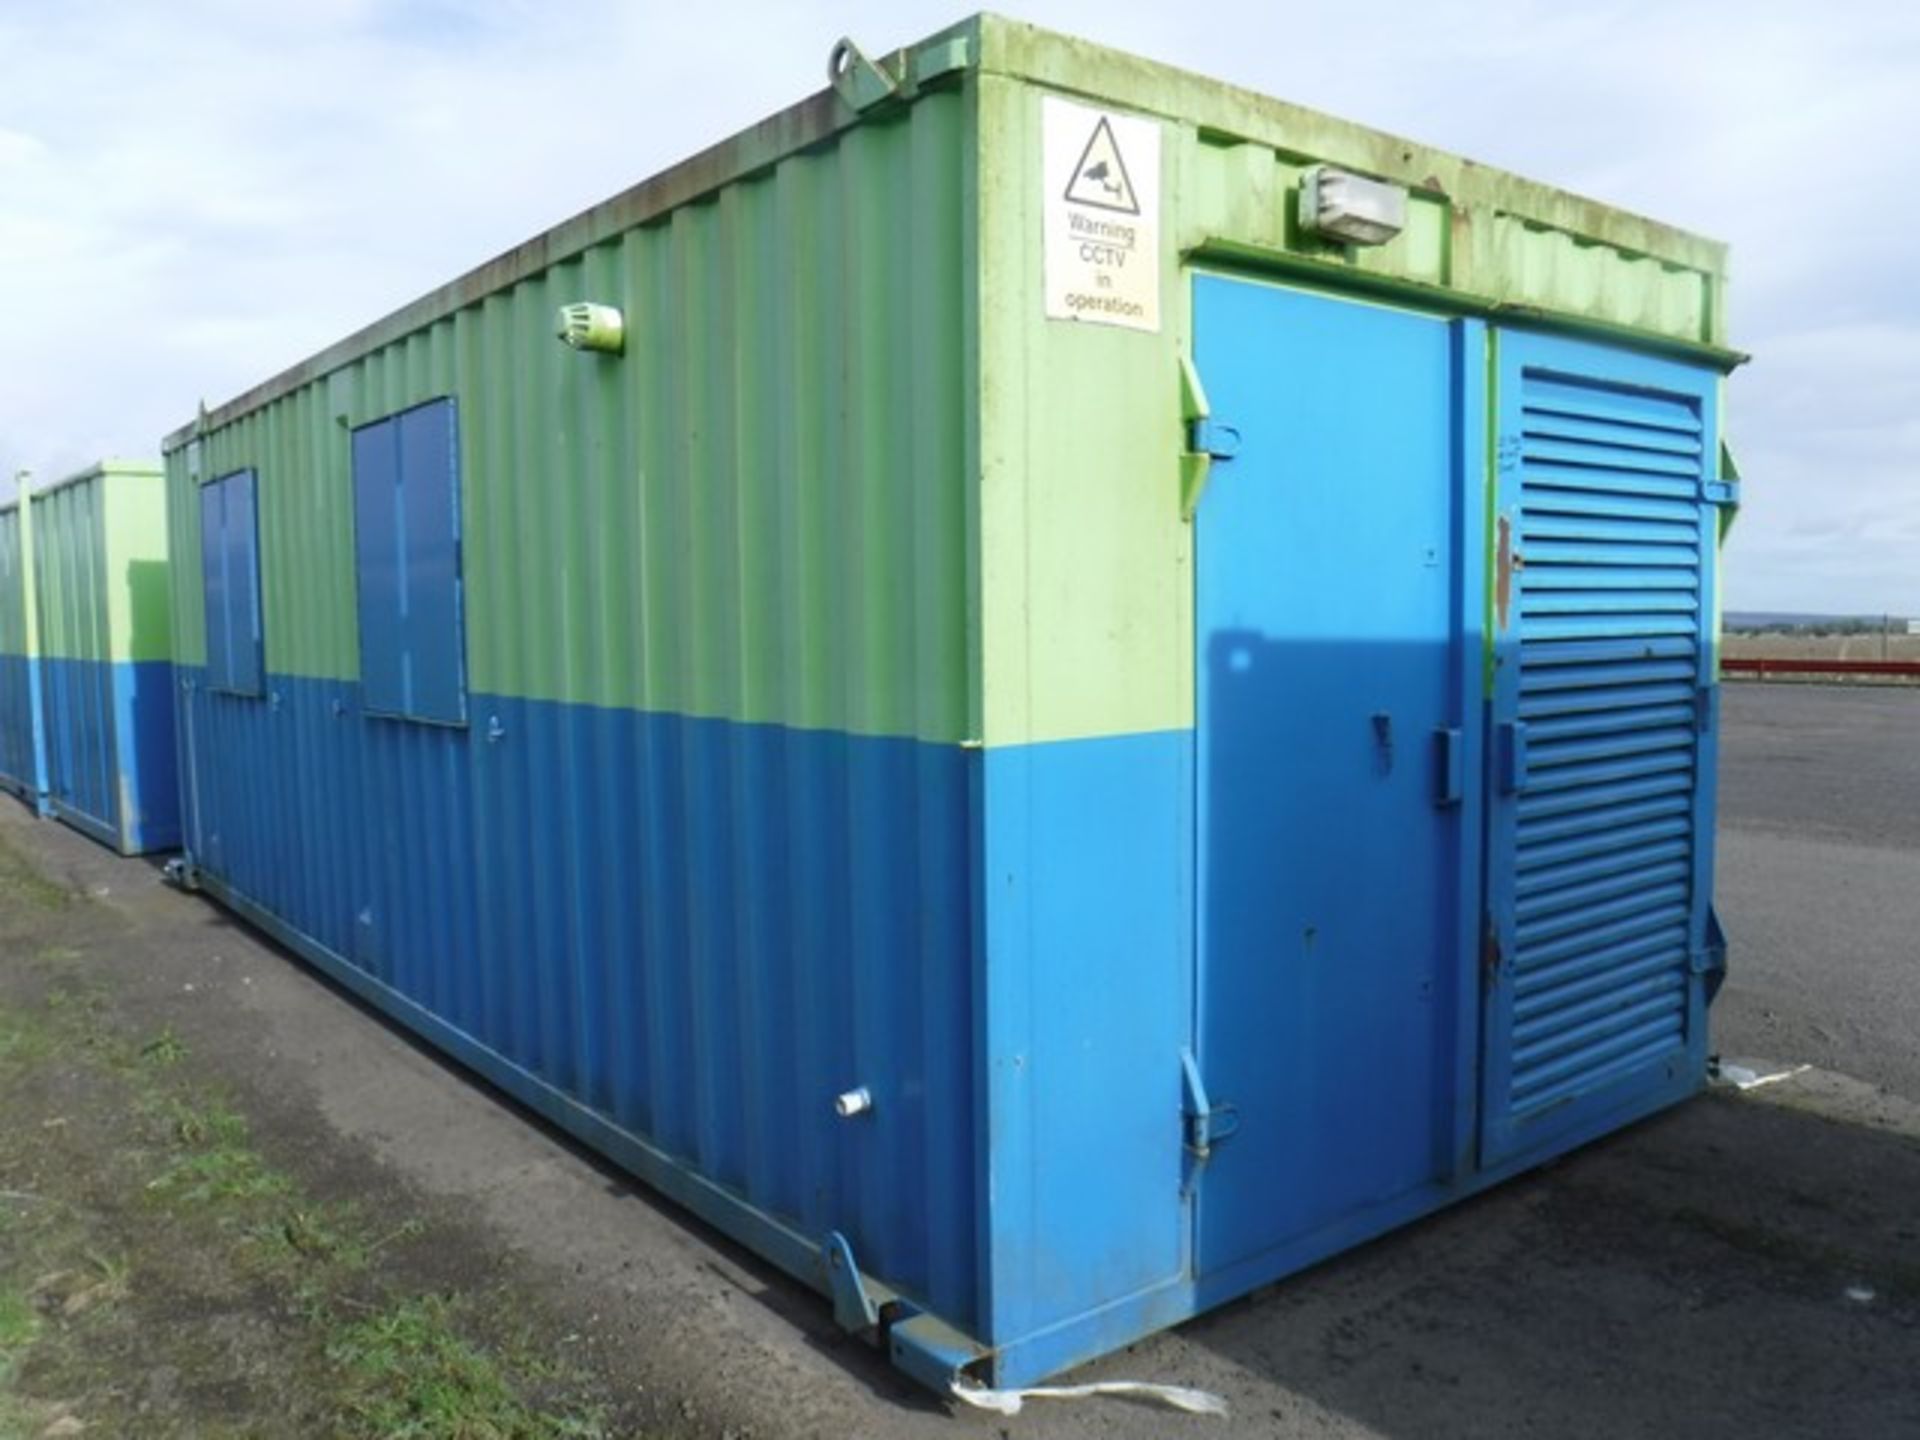 ANTI VANDAL UNIT 24 x 10FT C/W OFFICE, CANTEEN, END TOILET AND STORE **NO KEY FOR STORE** - Image 8 of 8